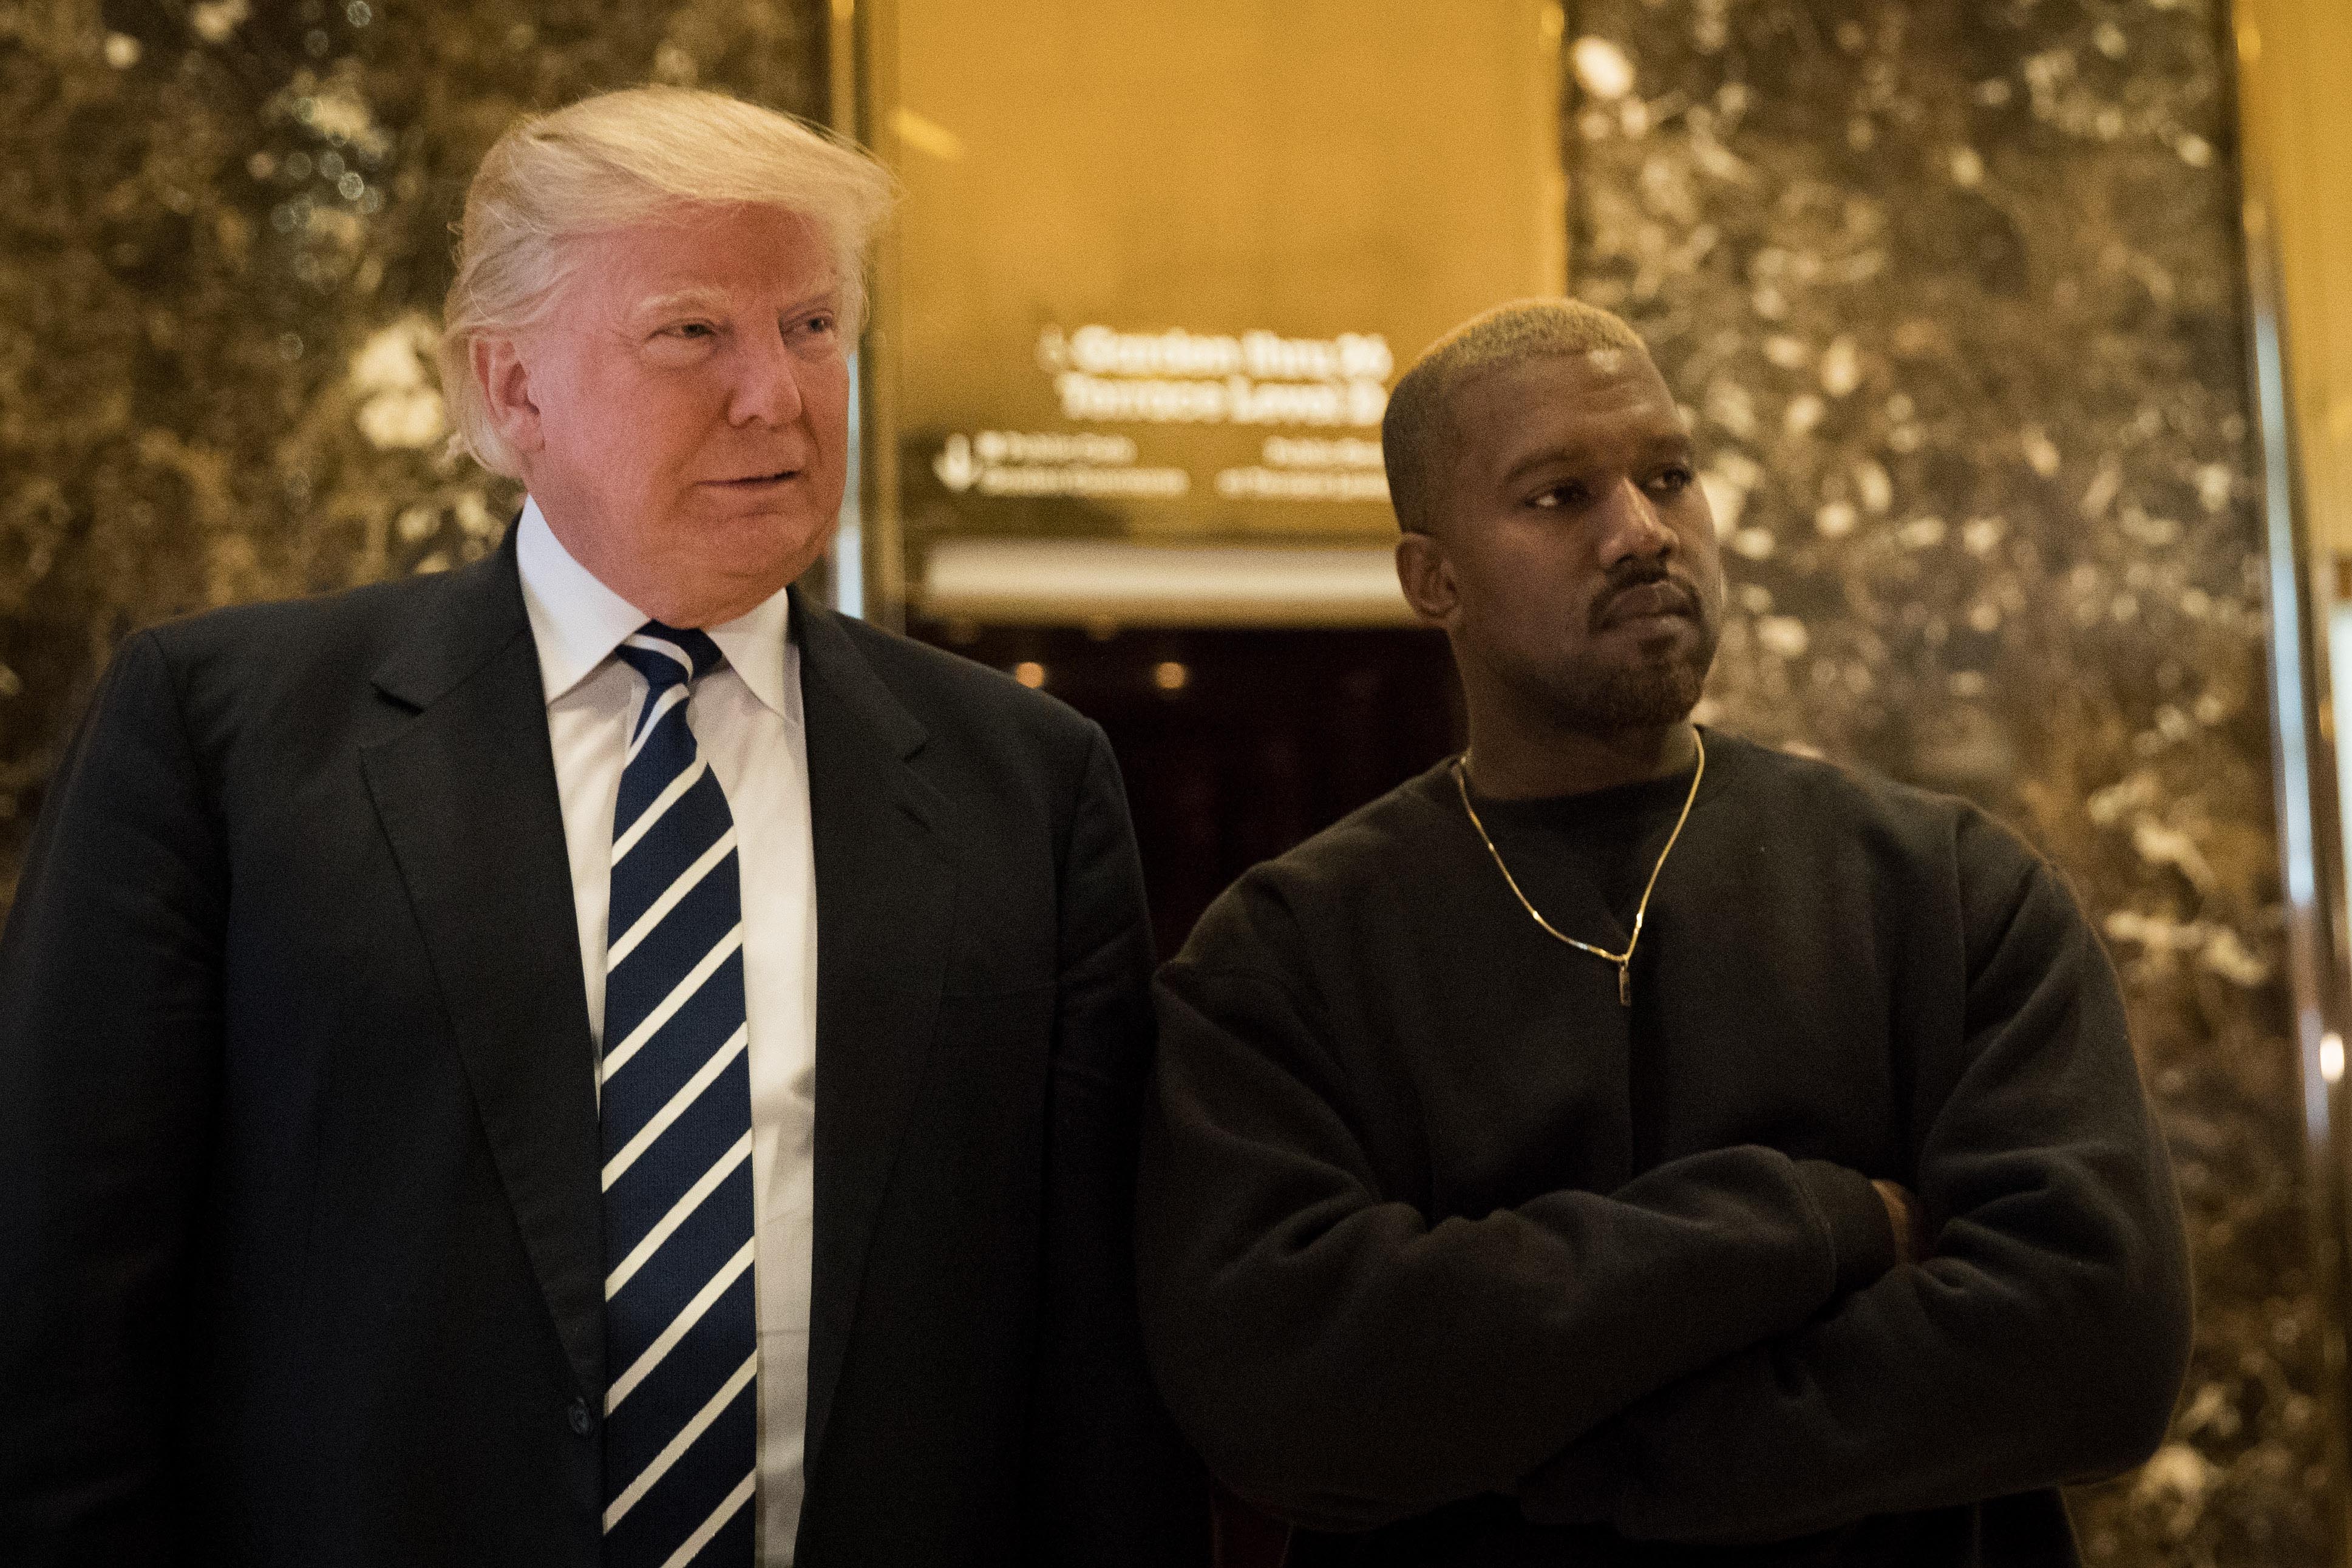 <p>This is a bit of an odd one but it still sort of counts as a celebrity endorsing the former president. In 2022, Ye (formerly Kanye West) announced that he's once again throwing his hat into the presidential election ring in 2024, tweeting that he'd like Trump to be his VP after visiting him at Mar-a-Lago. He wrote:</p><blockquote>First time at Mar-a-Lago. Rain and traffic. Can’t believe I kept President Trump waiting. And I had on jeans. What you guys think [Trump’s] response was when I asked him to be my running mate in 2024?</blockquote><p>It's a kind of support, don't you think?</p>